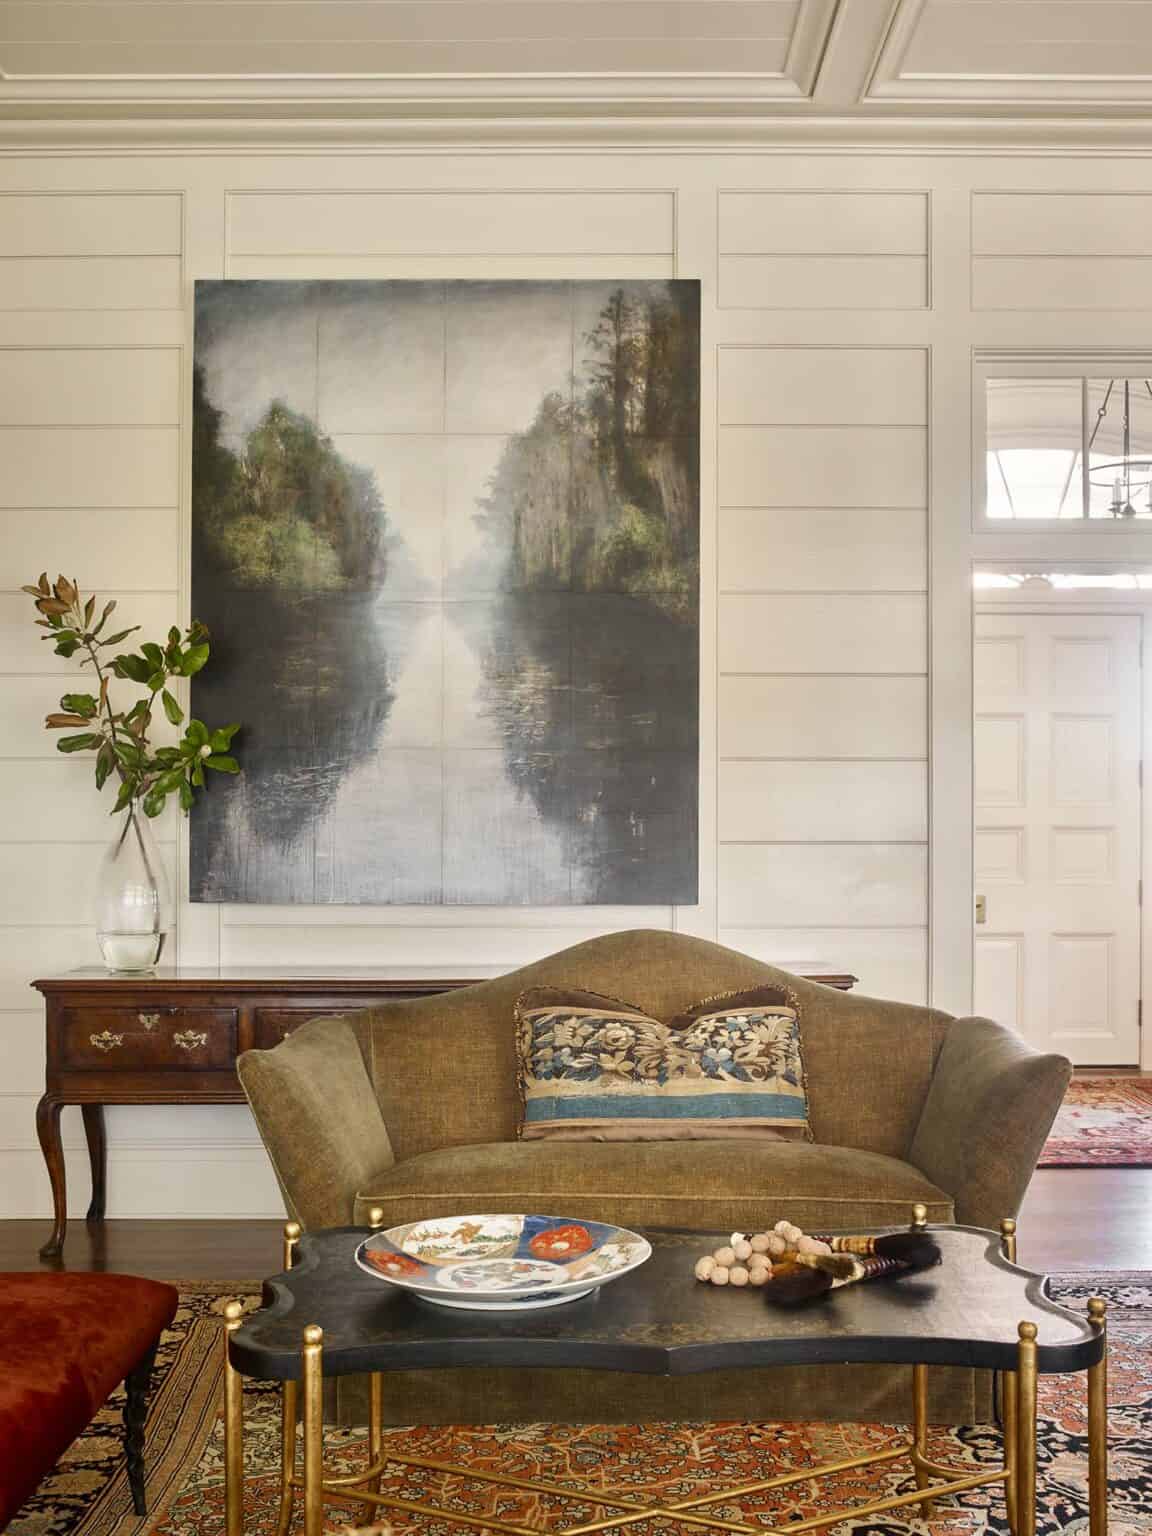 A Louisiana home on the bayou gets reimagined for comfort and relaxation